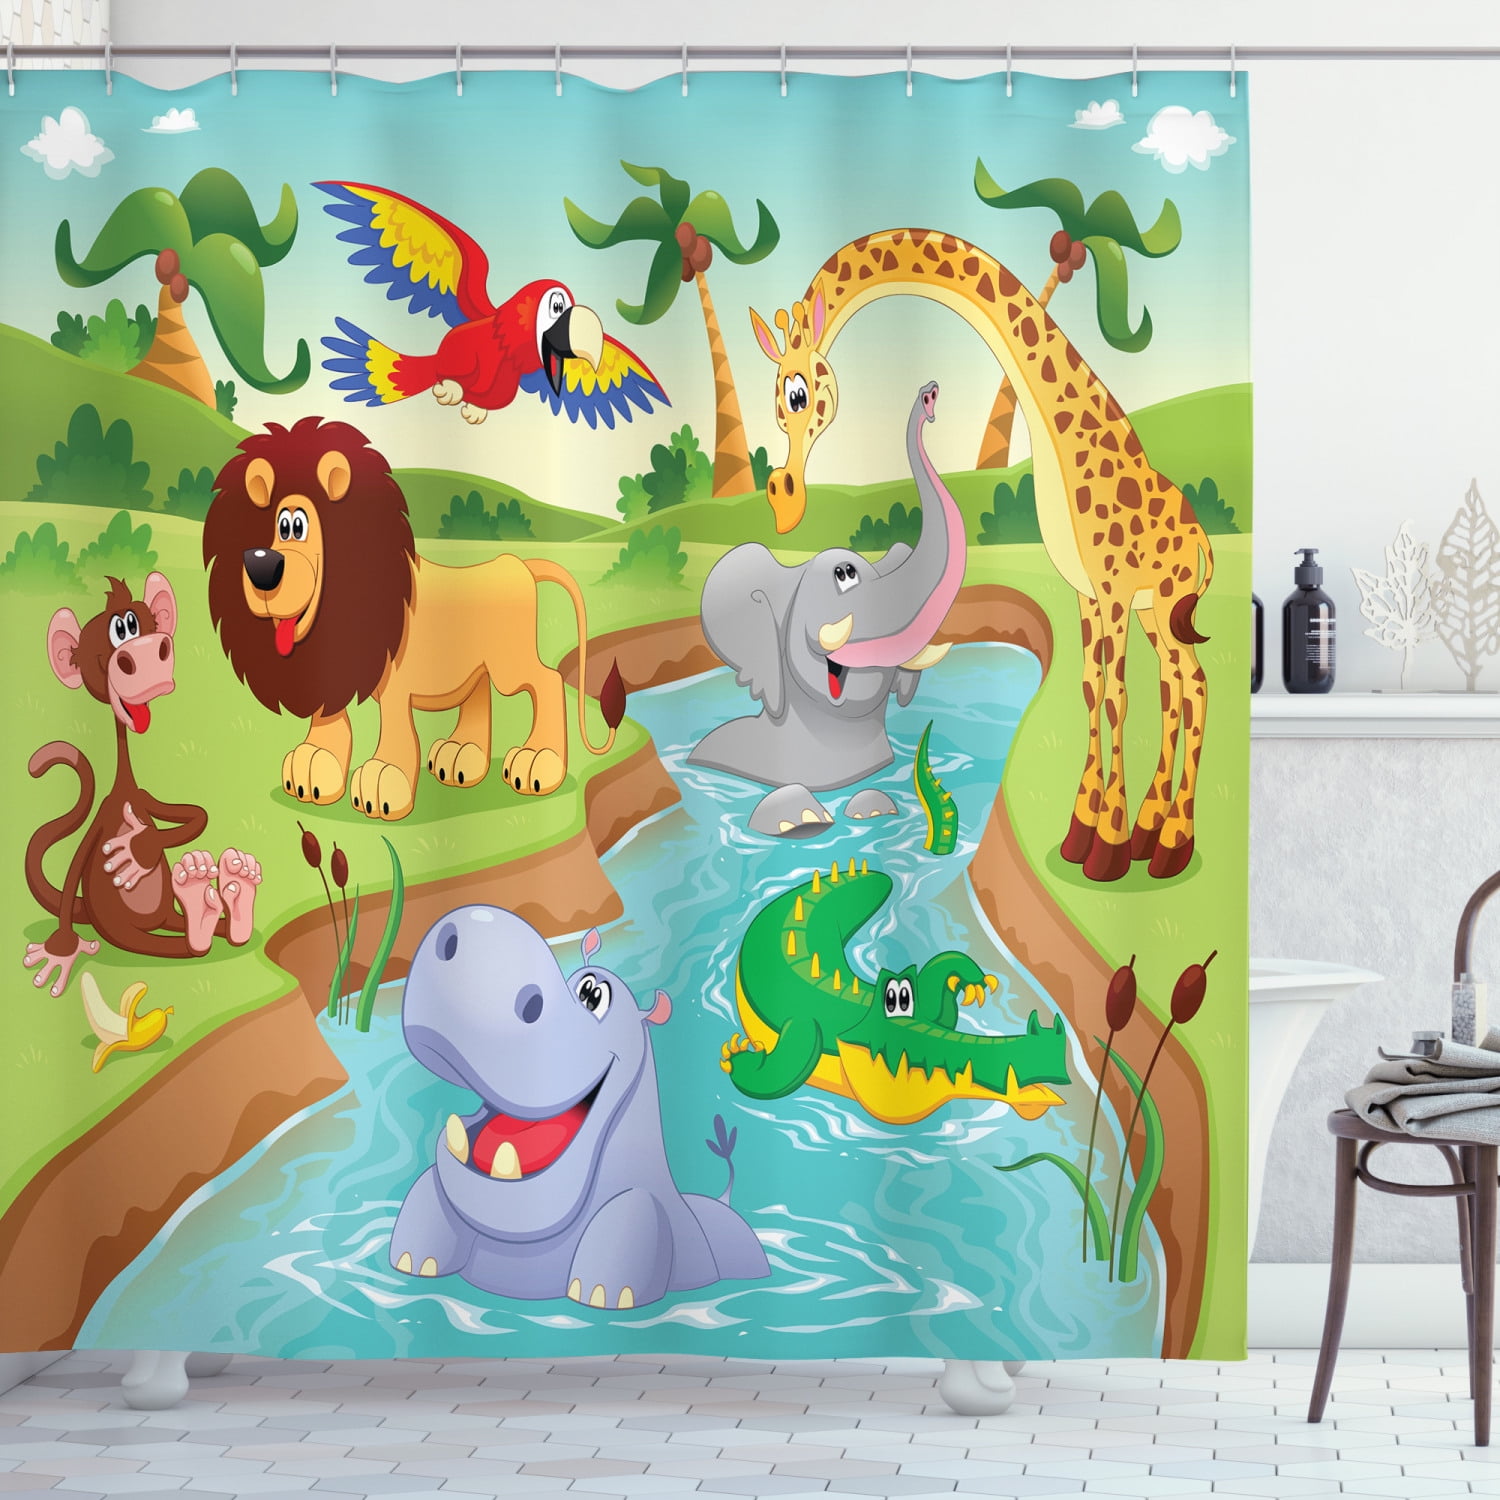 Elephant mother and child Shower Curtain Bathroom Decor Fabric & 12hooks 71*71in 